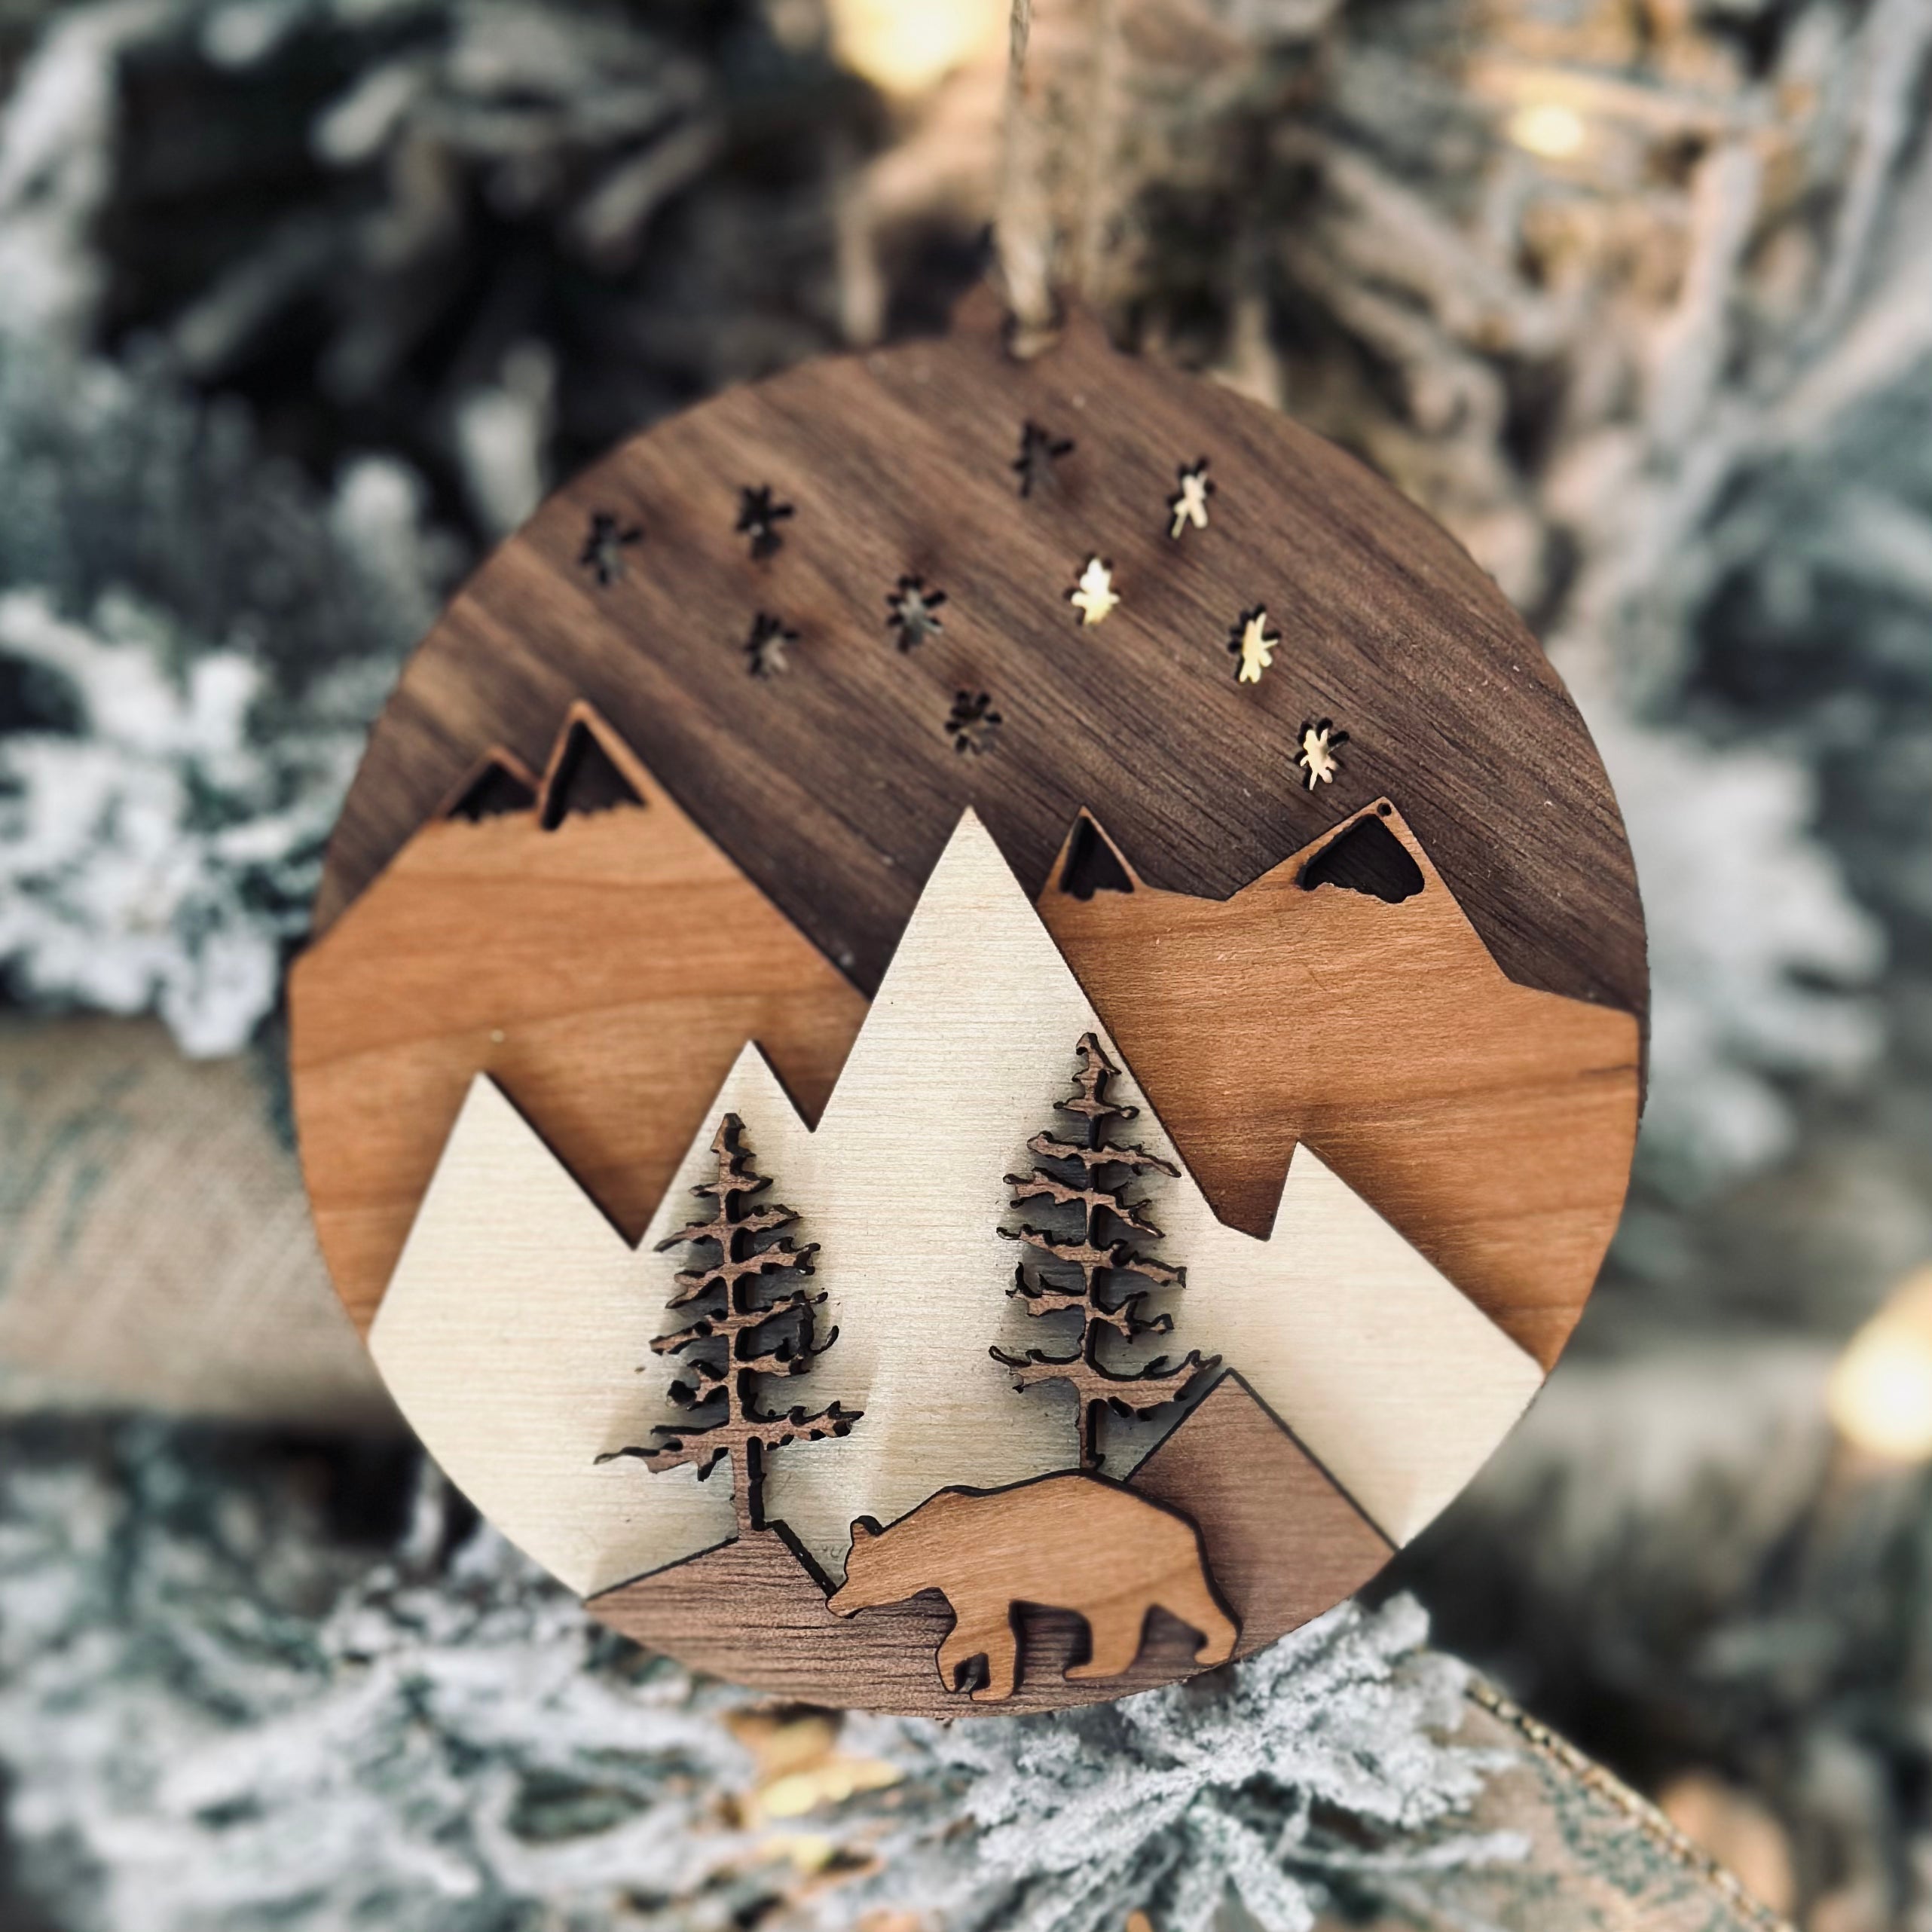 Fox Forest - Layered 3-D Wooden Ornament Collection by Acorn & Fox